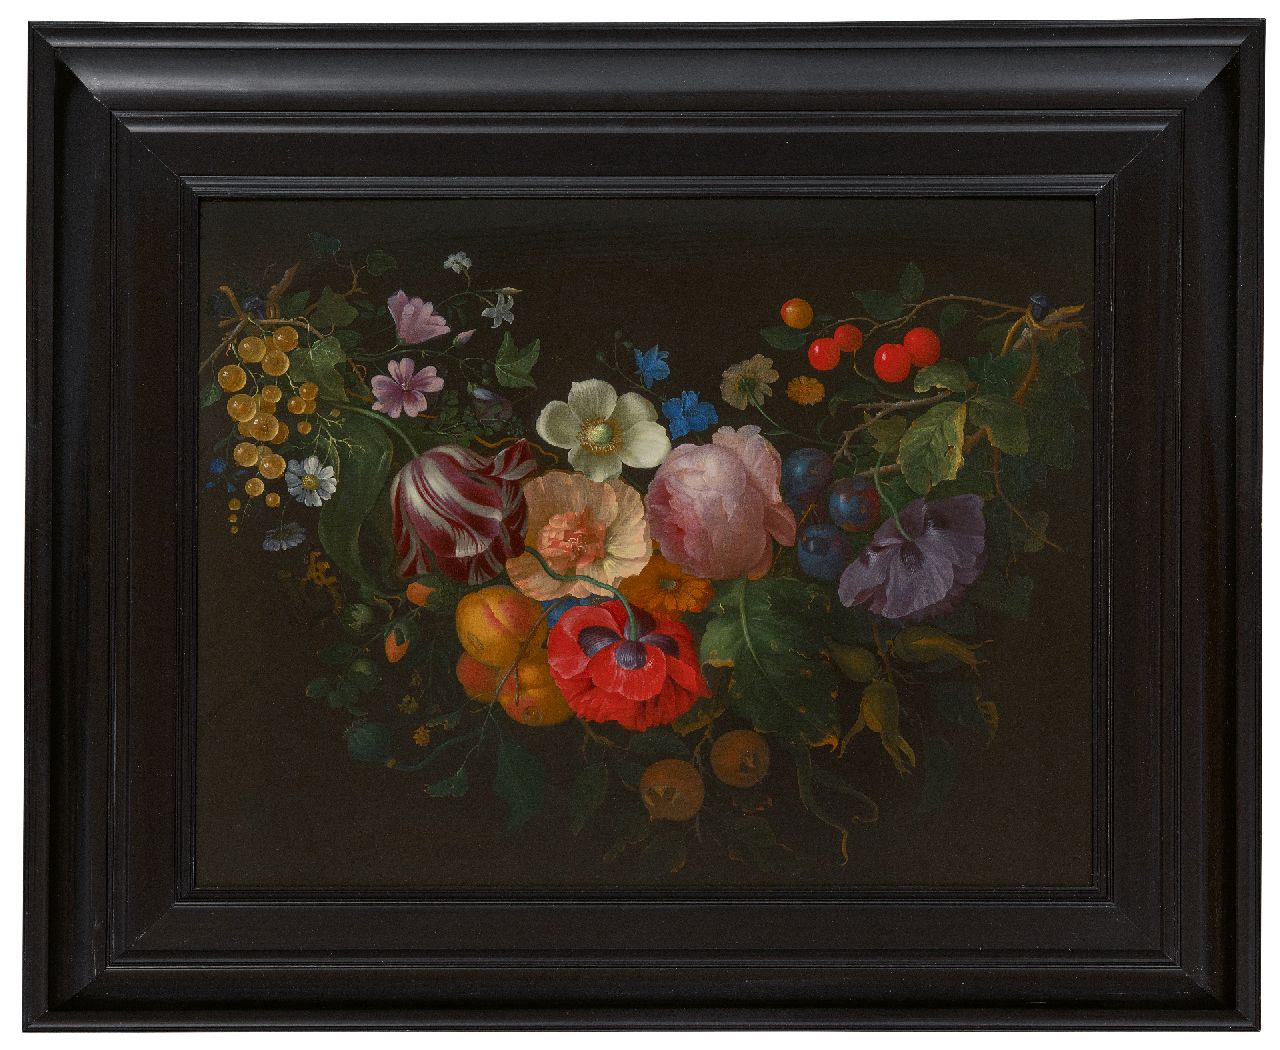 Gallis P.  | Pieter Gallis | Paintings offered for sale | flower garland, oil on panel 35.3 x 43.8 cm, painted ca. 1685